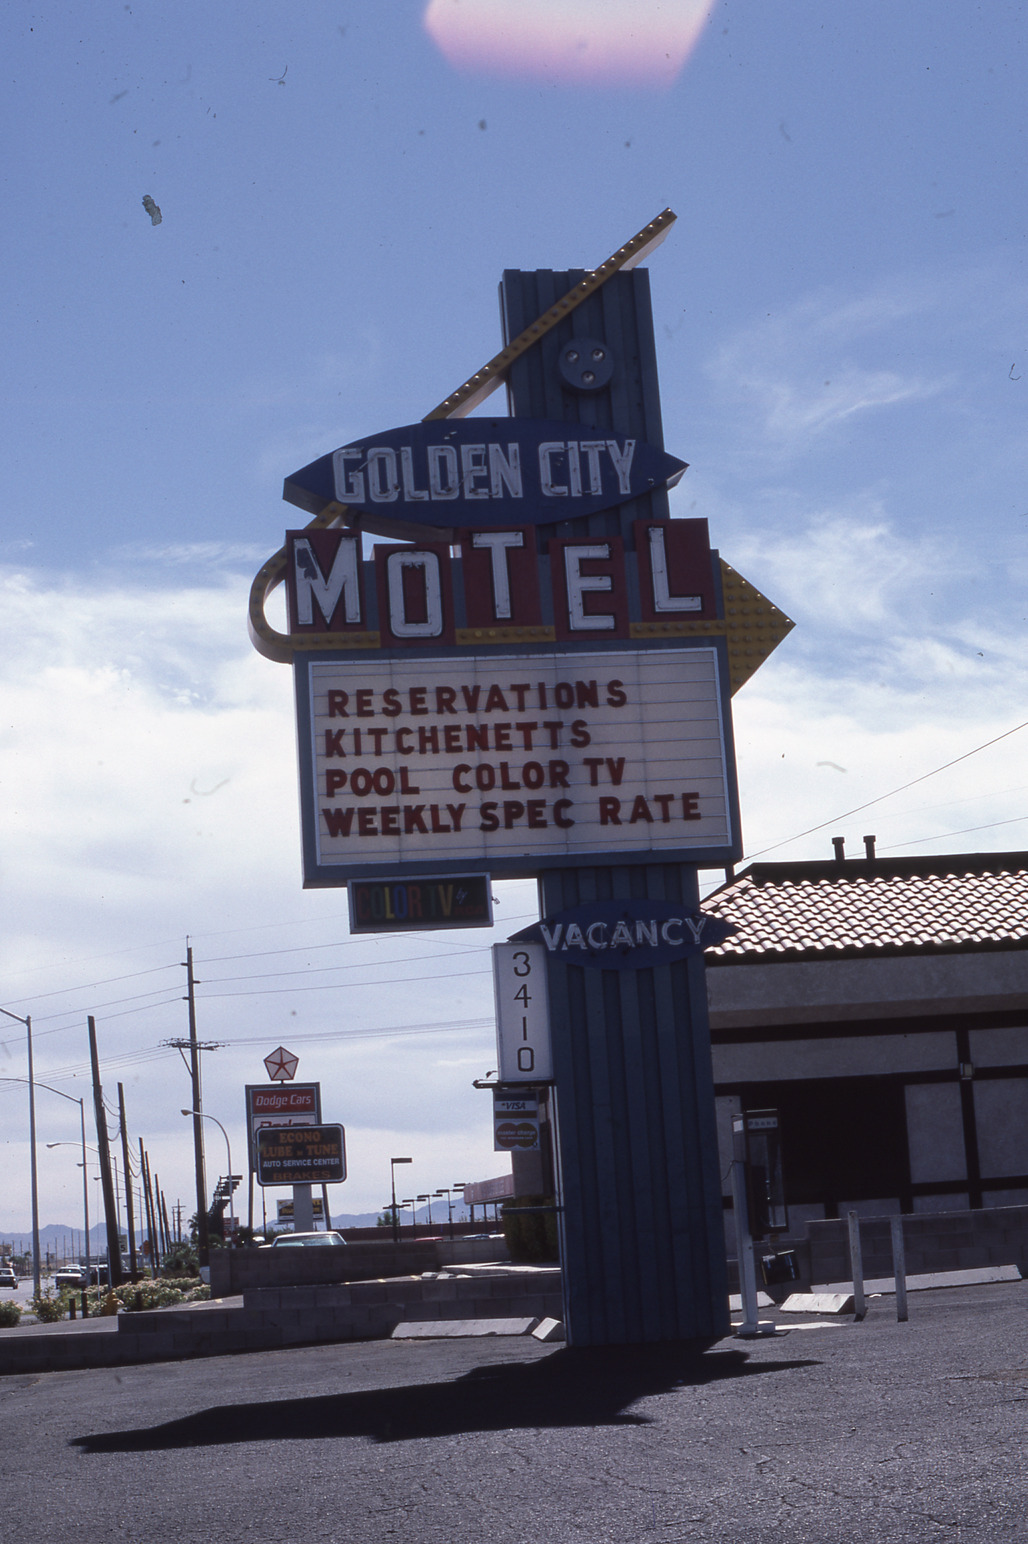 Golden City Motel monument and marquee signs, Las Vegas, Nevada: photographic print